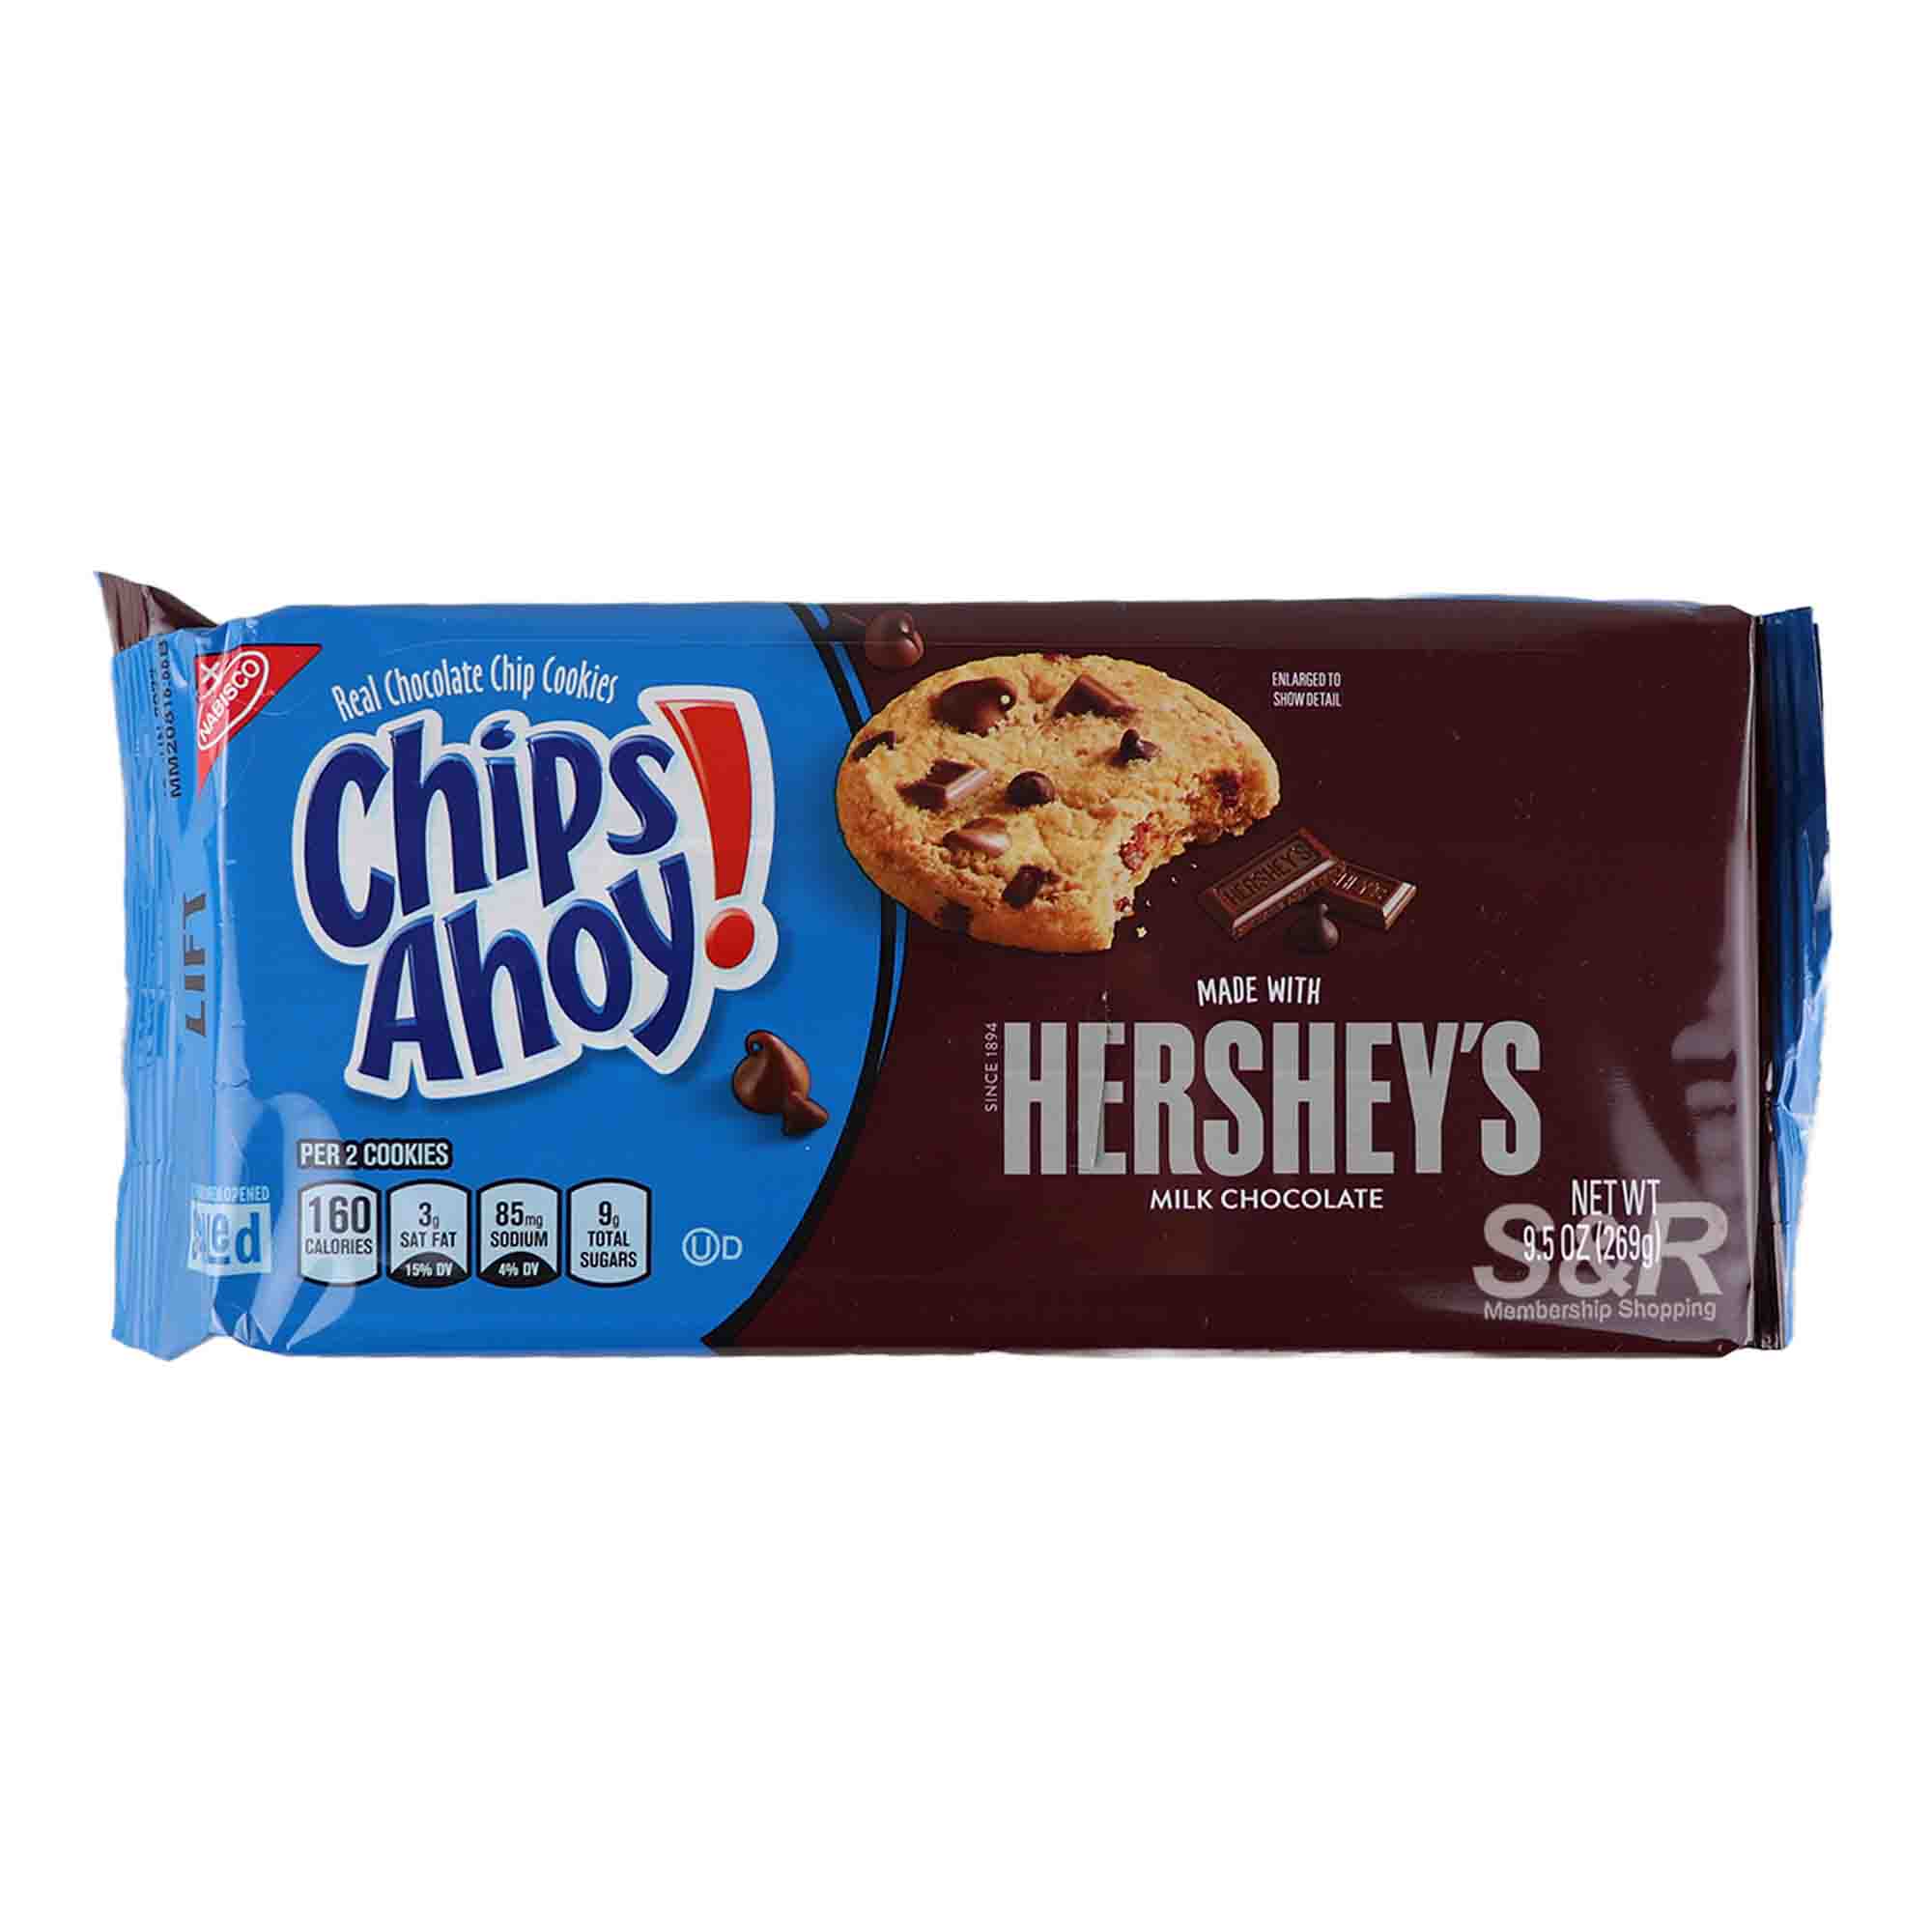 Chips Ahoy! Chocolate Chip Cookies made with Hershey's Milk Chocolate 269g